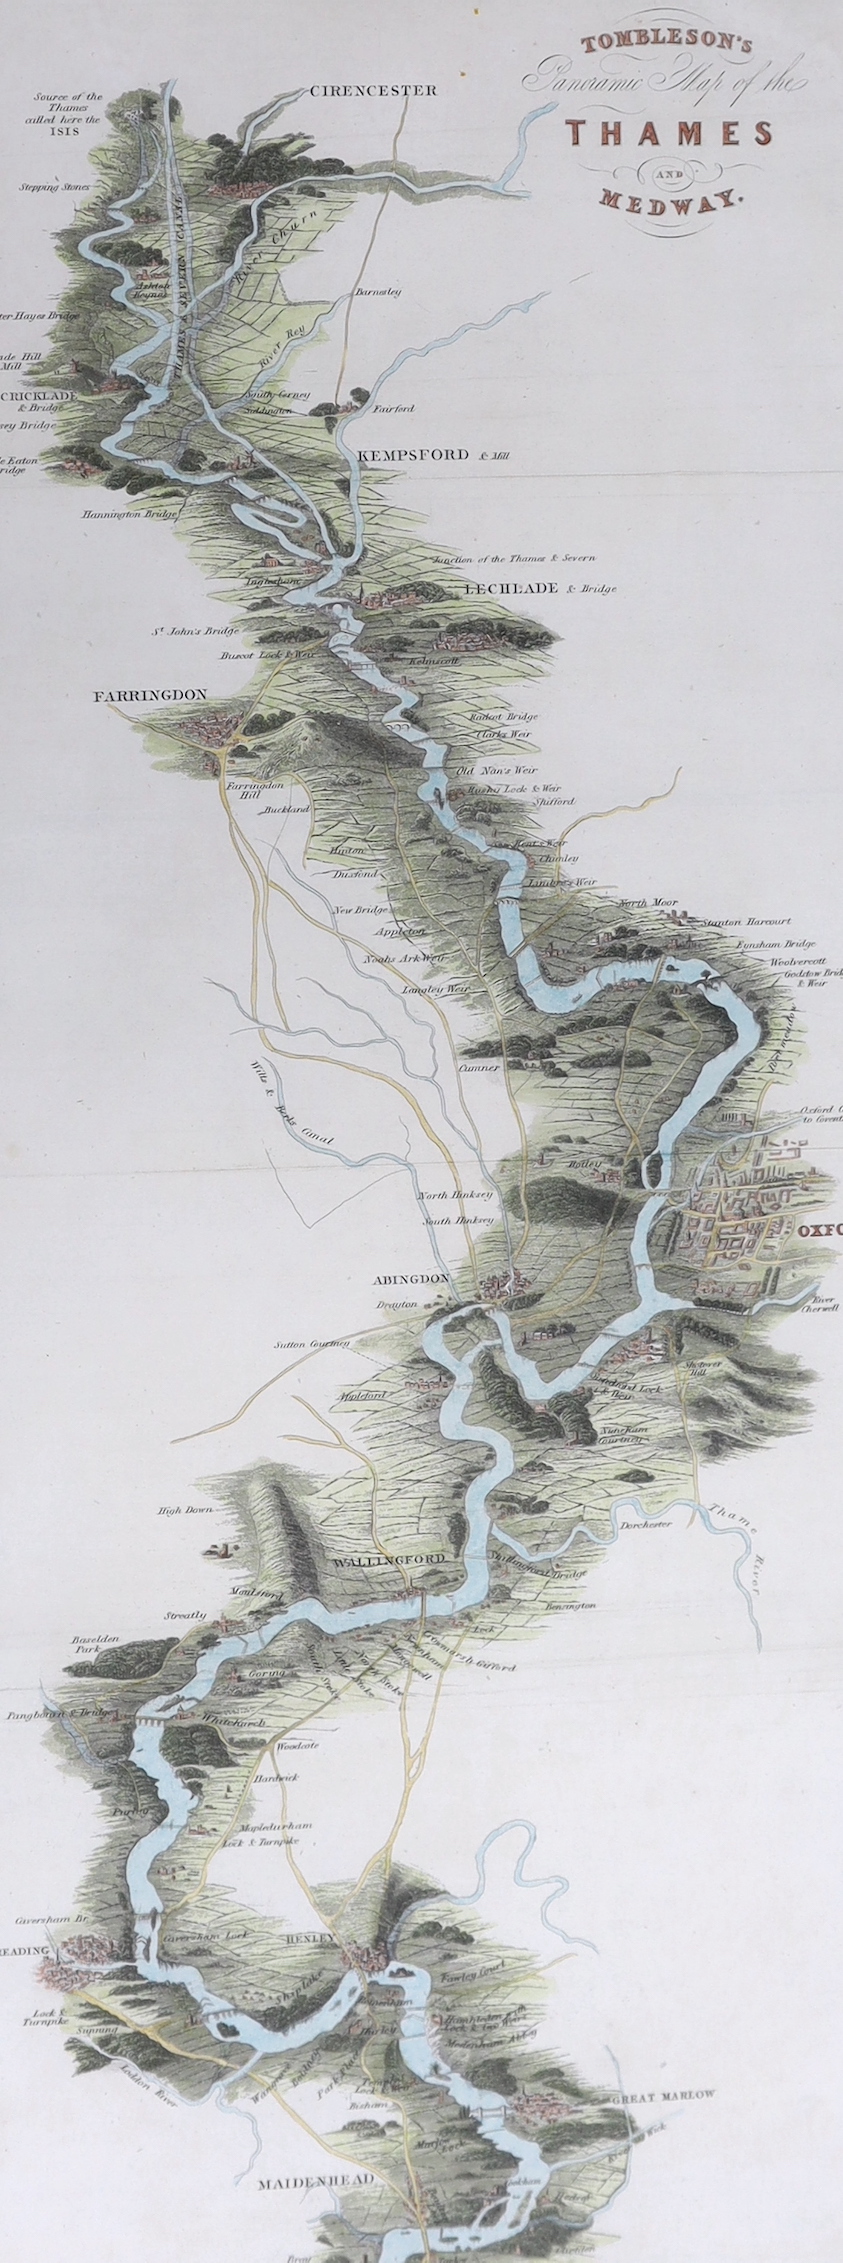 Tombleson's Thames, hand coloured engraved panoramic map of the Thames and Medway, 127 x 24cm